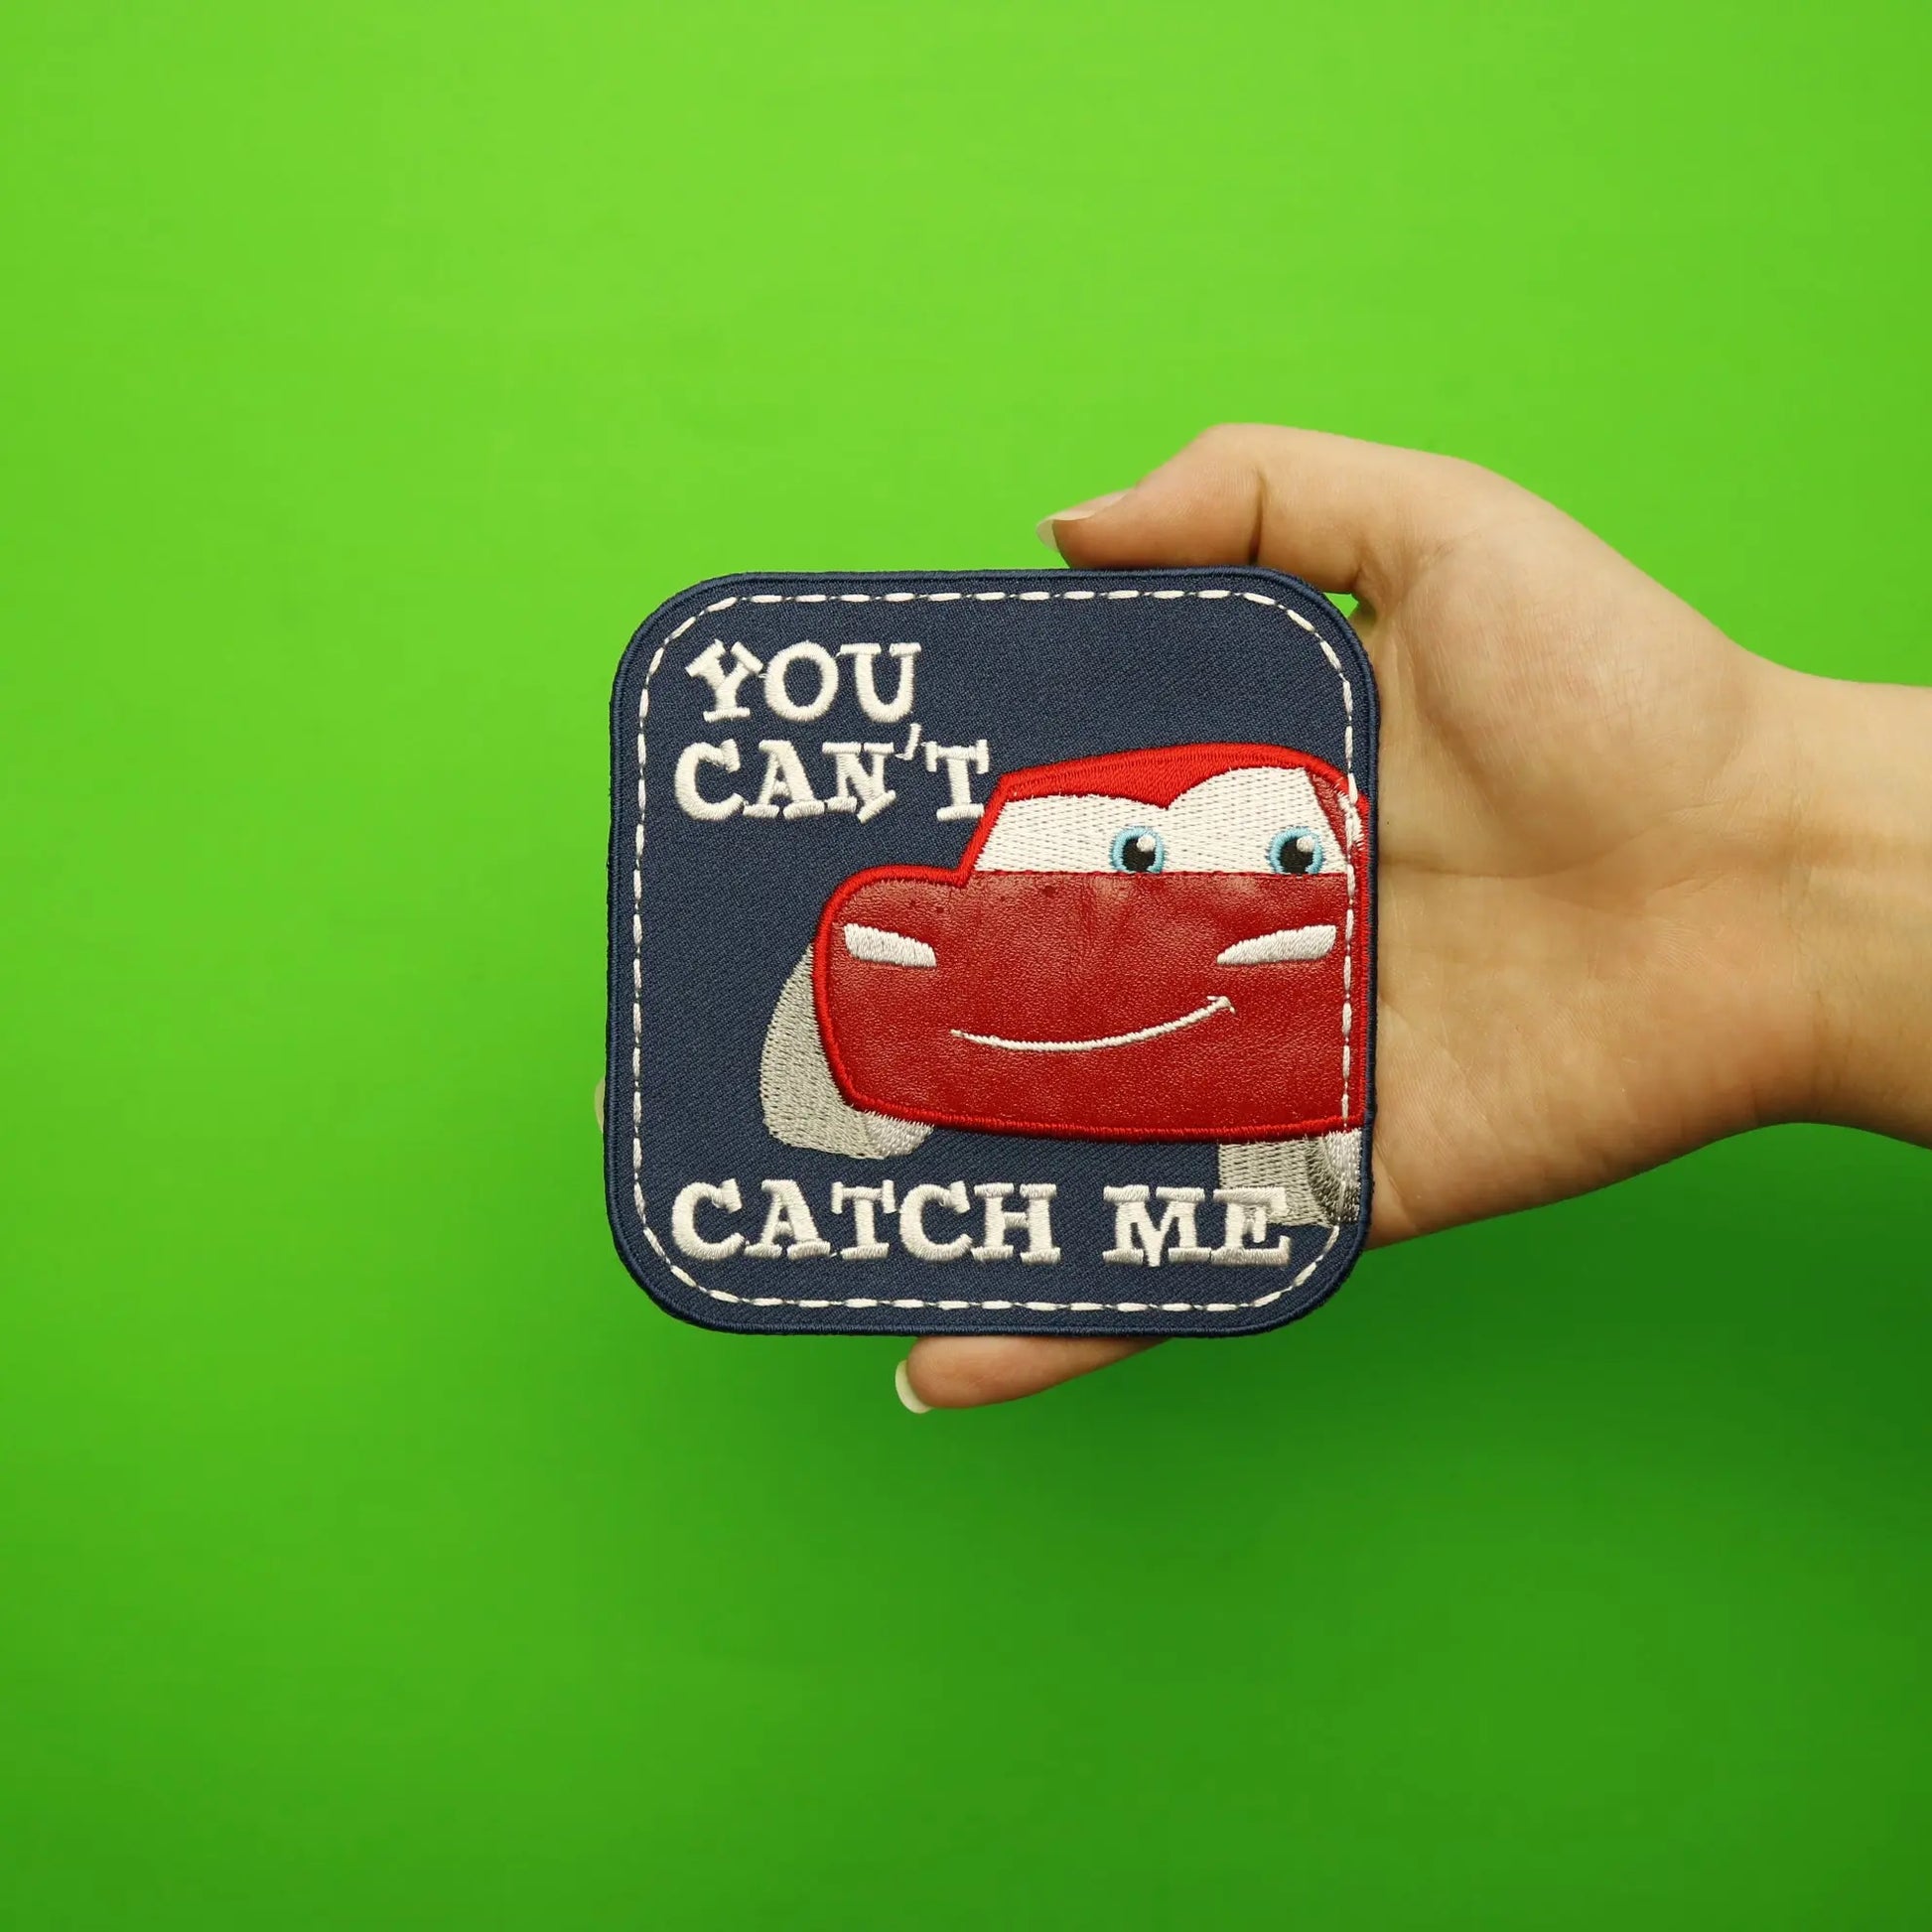 Disney Cars You Can't Catch Me Embroidered Applique Patch 